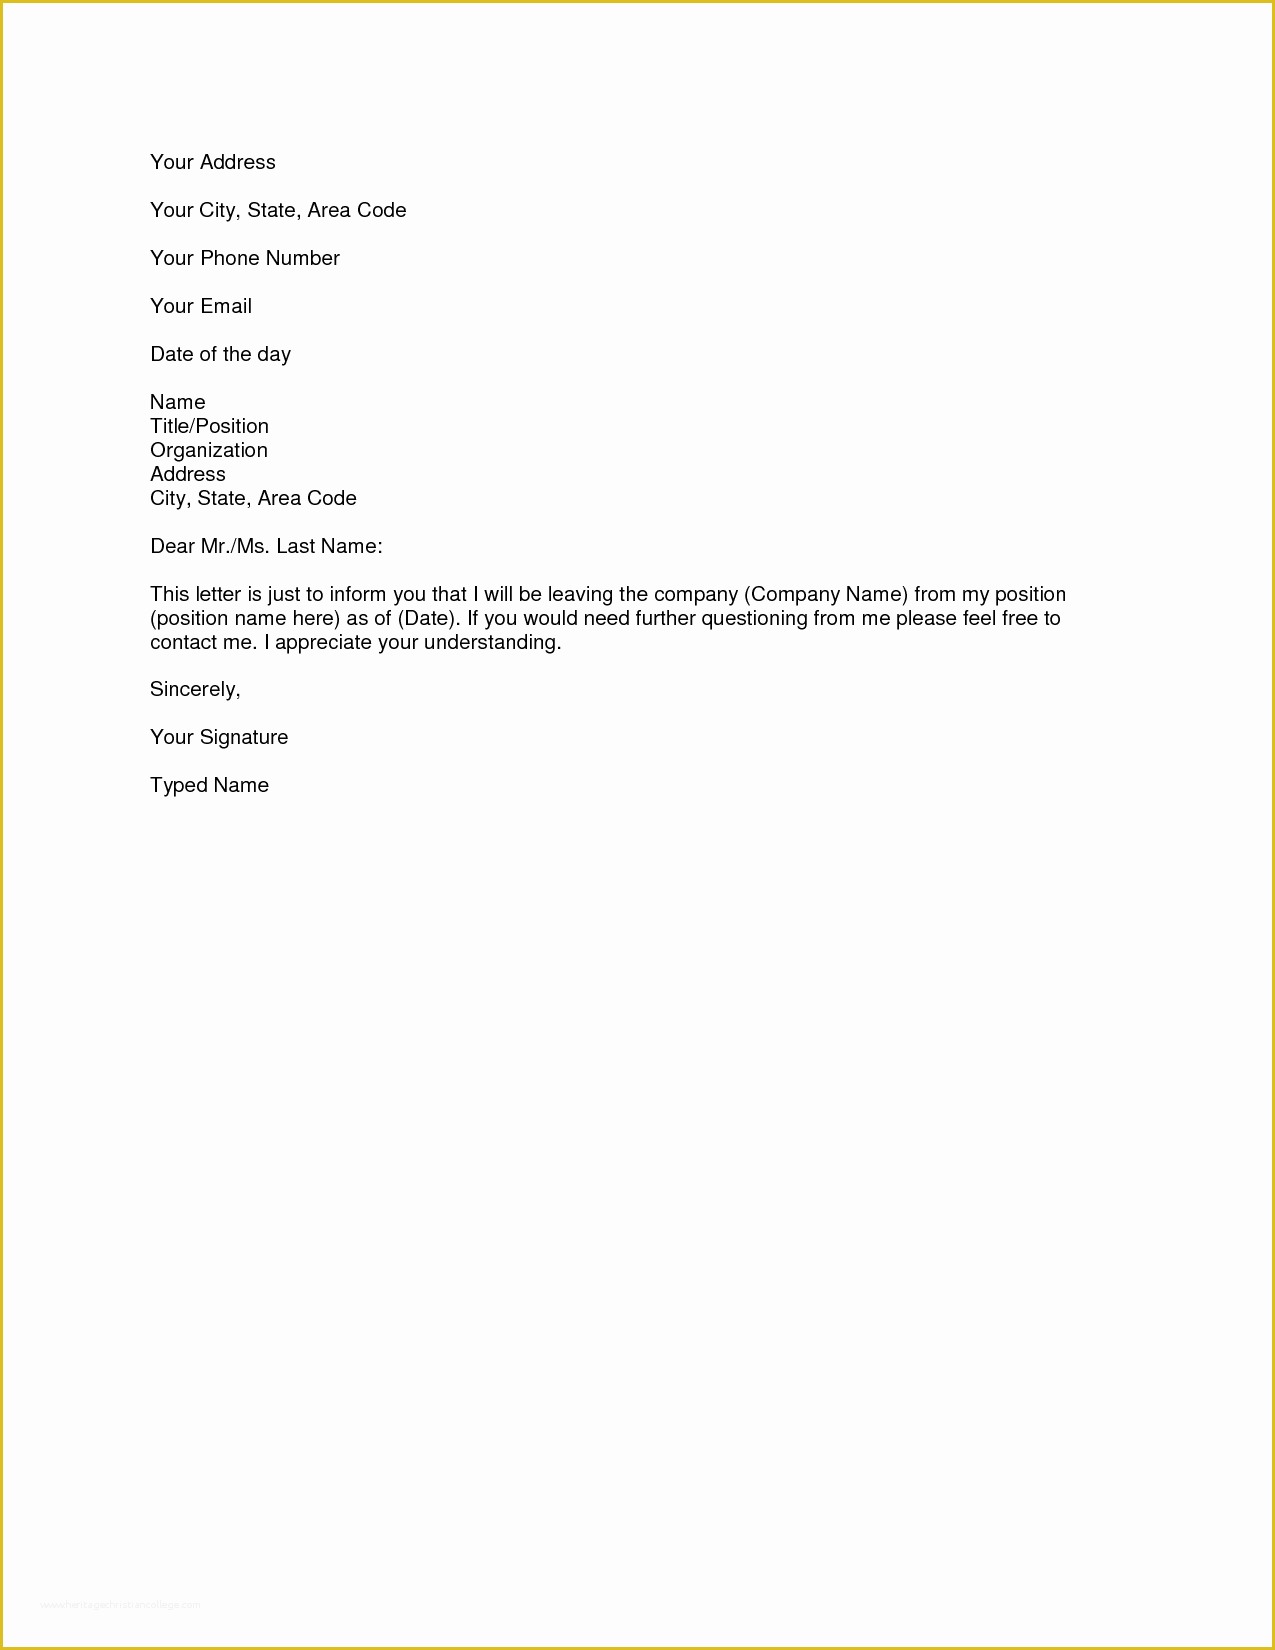 Free Resignation Letter Template Word Of Microsoft Word Resignation Letter Template Simple